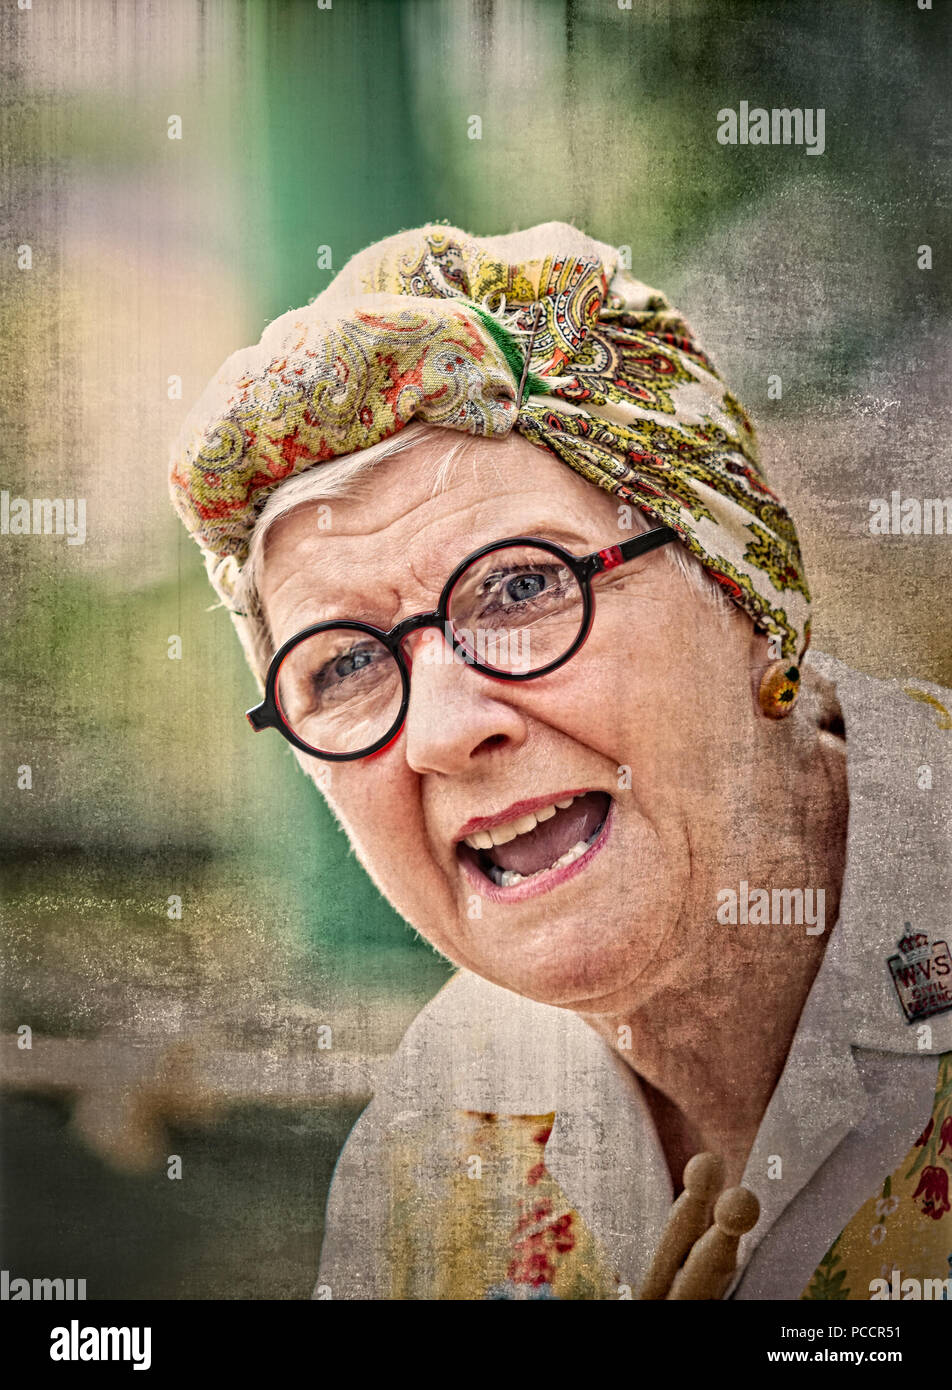 Close-up, front view portrait of woman in headscarf & overall as authentic vintage housewife, charlady at UK 1940's WWII summer event. Stock Photo